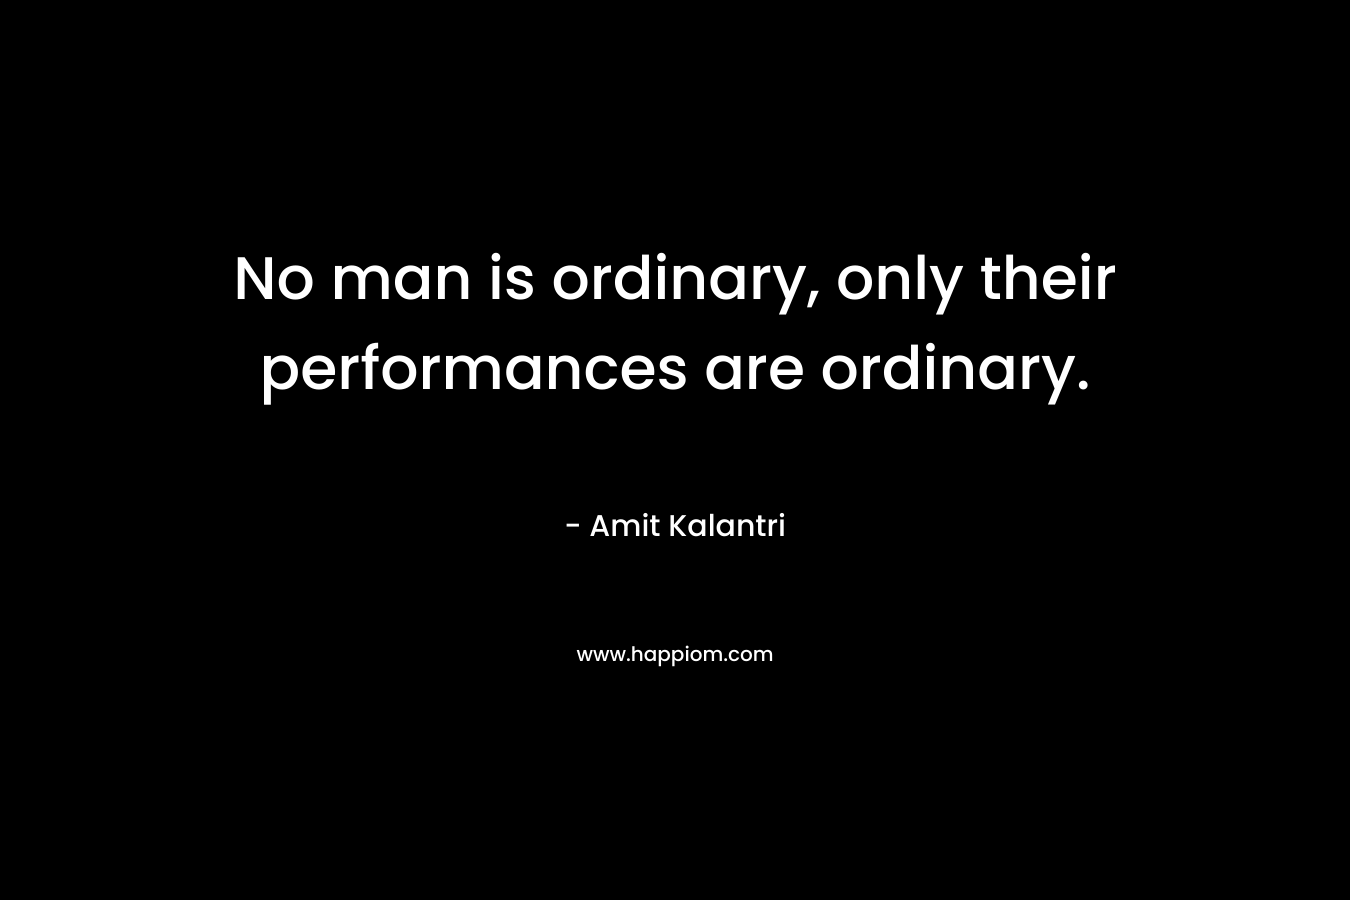 No man is ordinary, only their performances are ordinary.